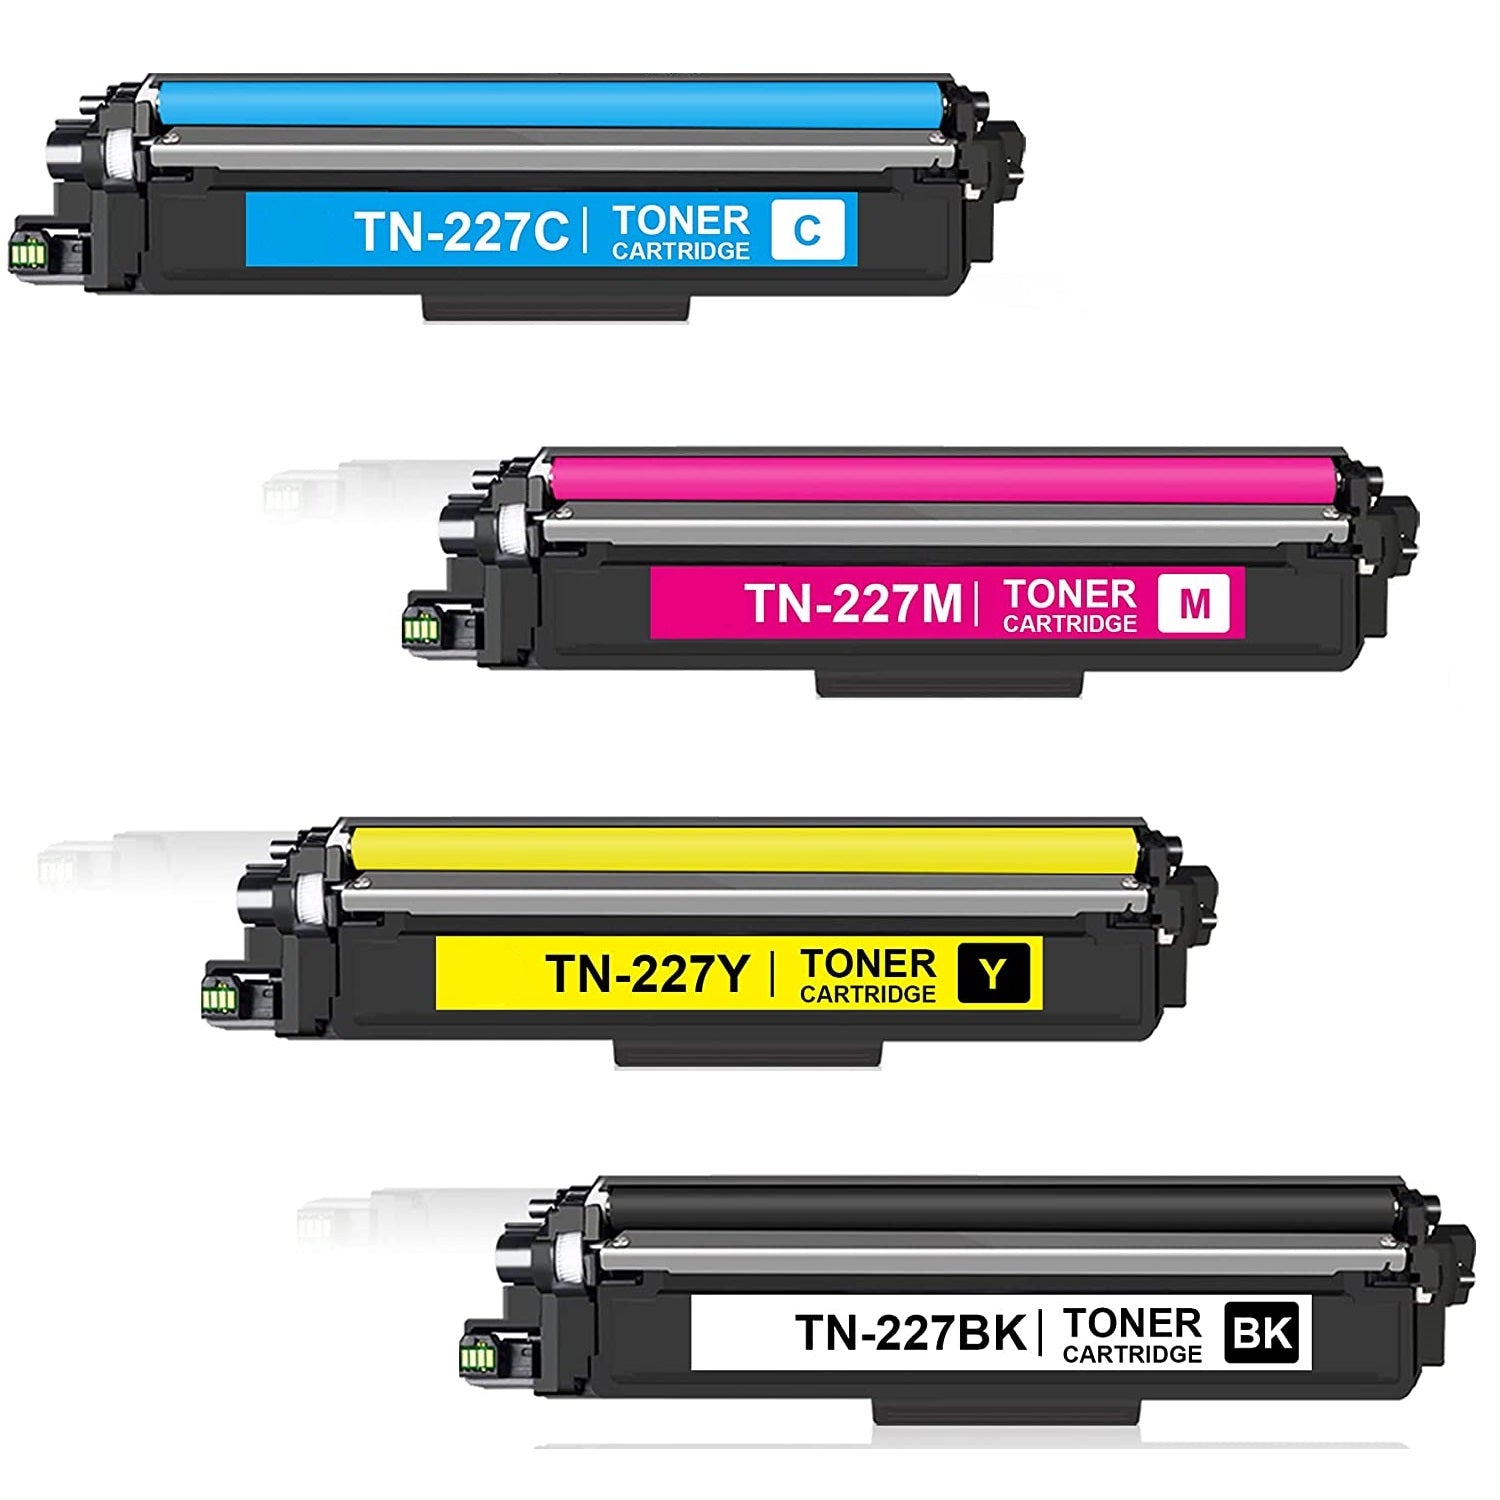 Absolute Toner Compatible Brother TN227 High Yield Toner Cartridge Combo (BK/C/M/Y) Brother Toner Cartridges